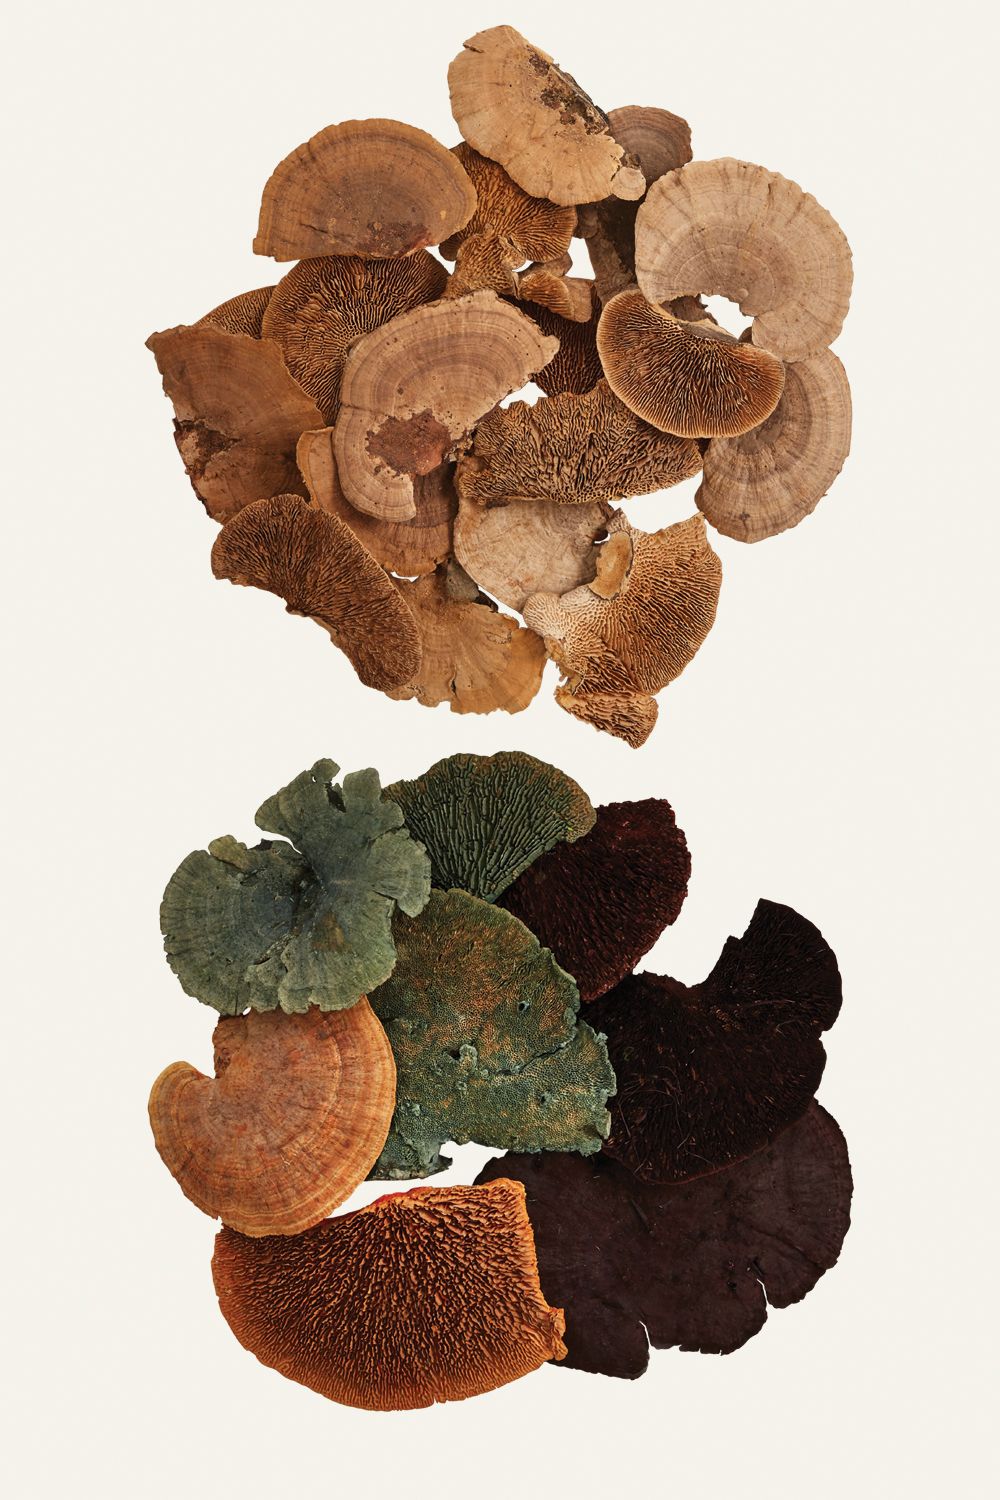 The Dried Sponge Mushroom by Accent Decor | Luxury Dried Flowers | Willow & Albert Home